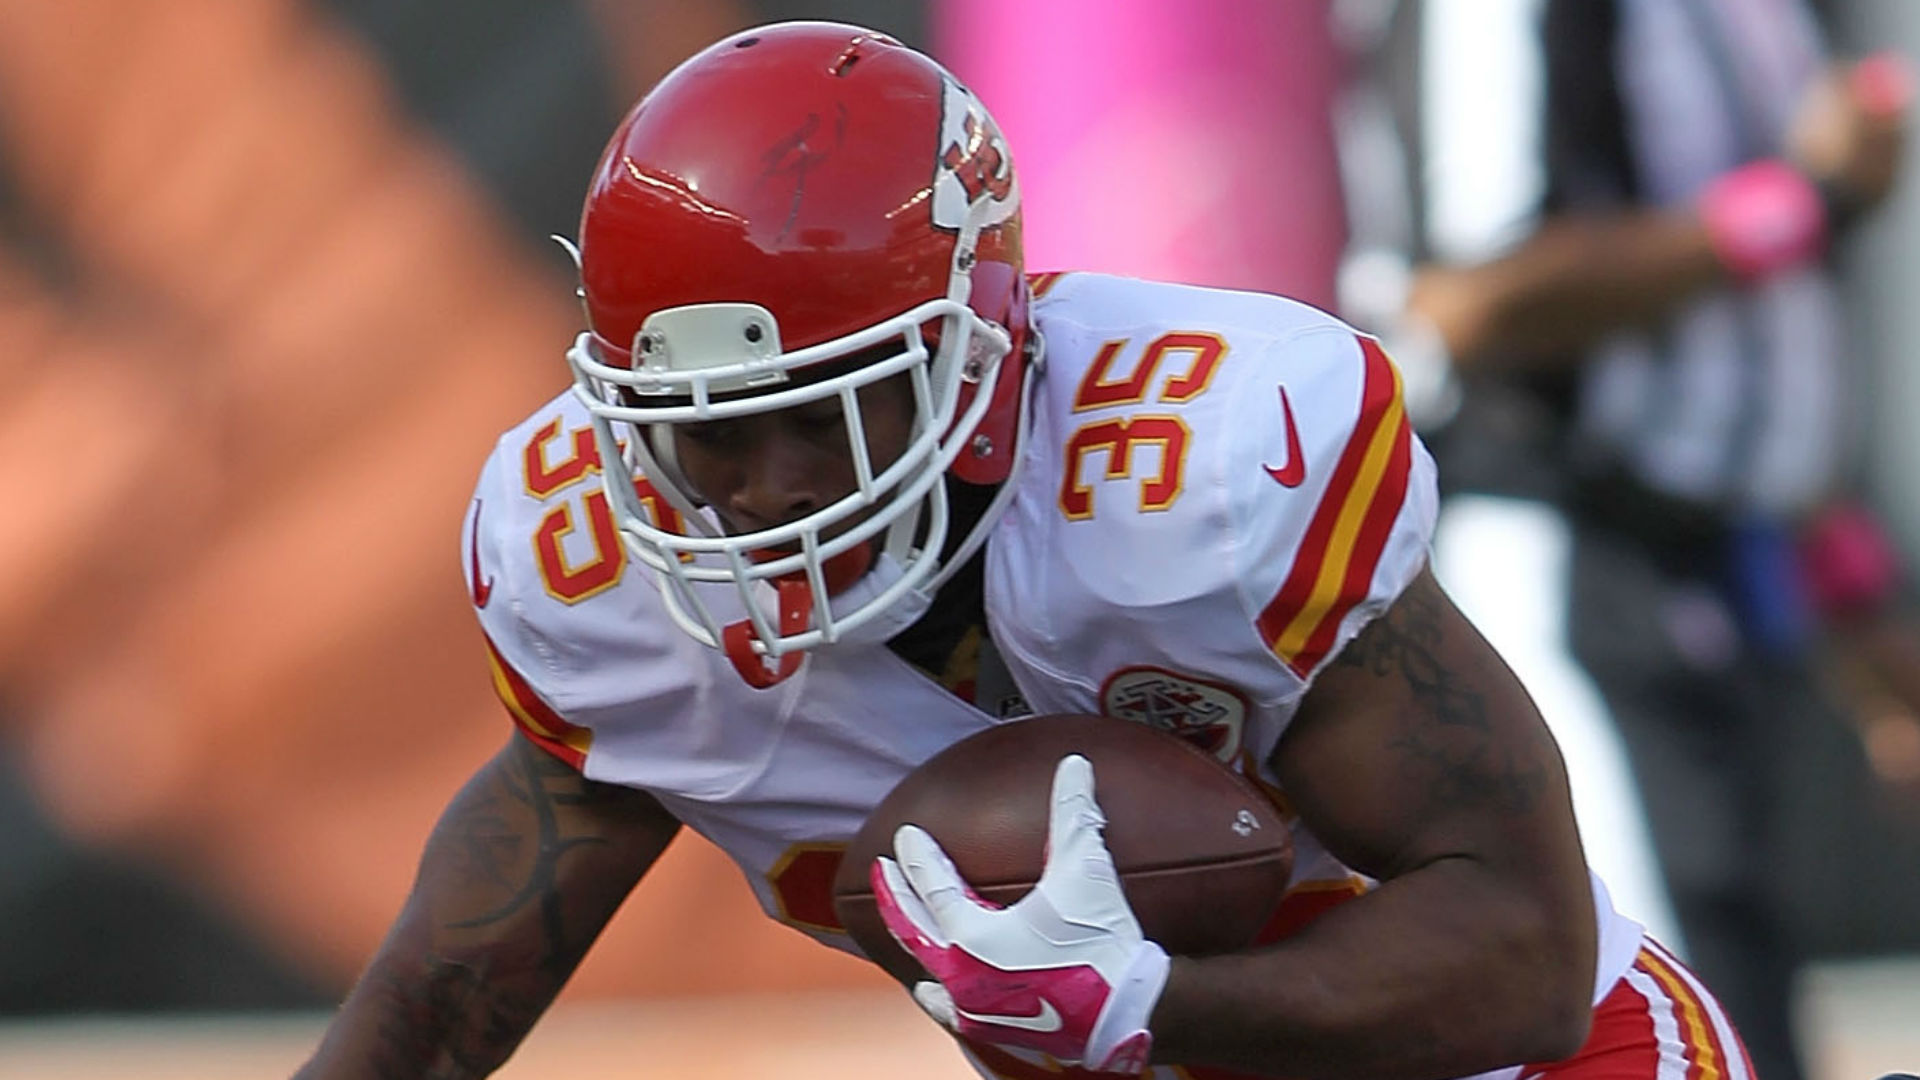 Chiefs expected to sign RB Charcandrick West, report says